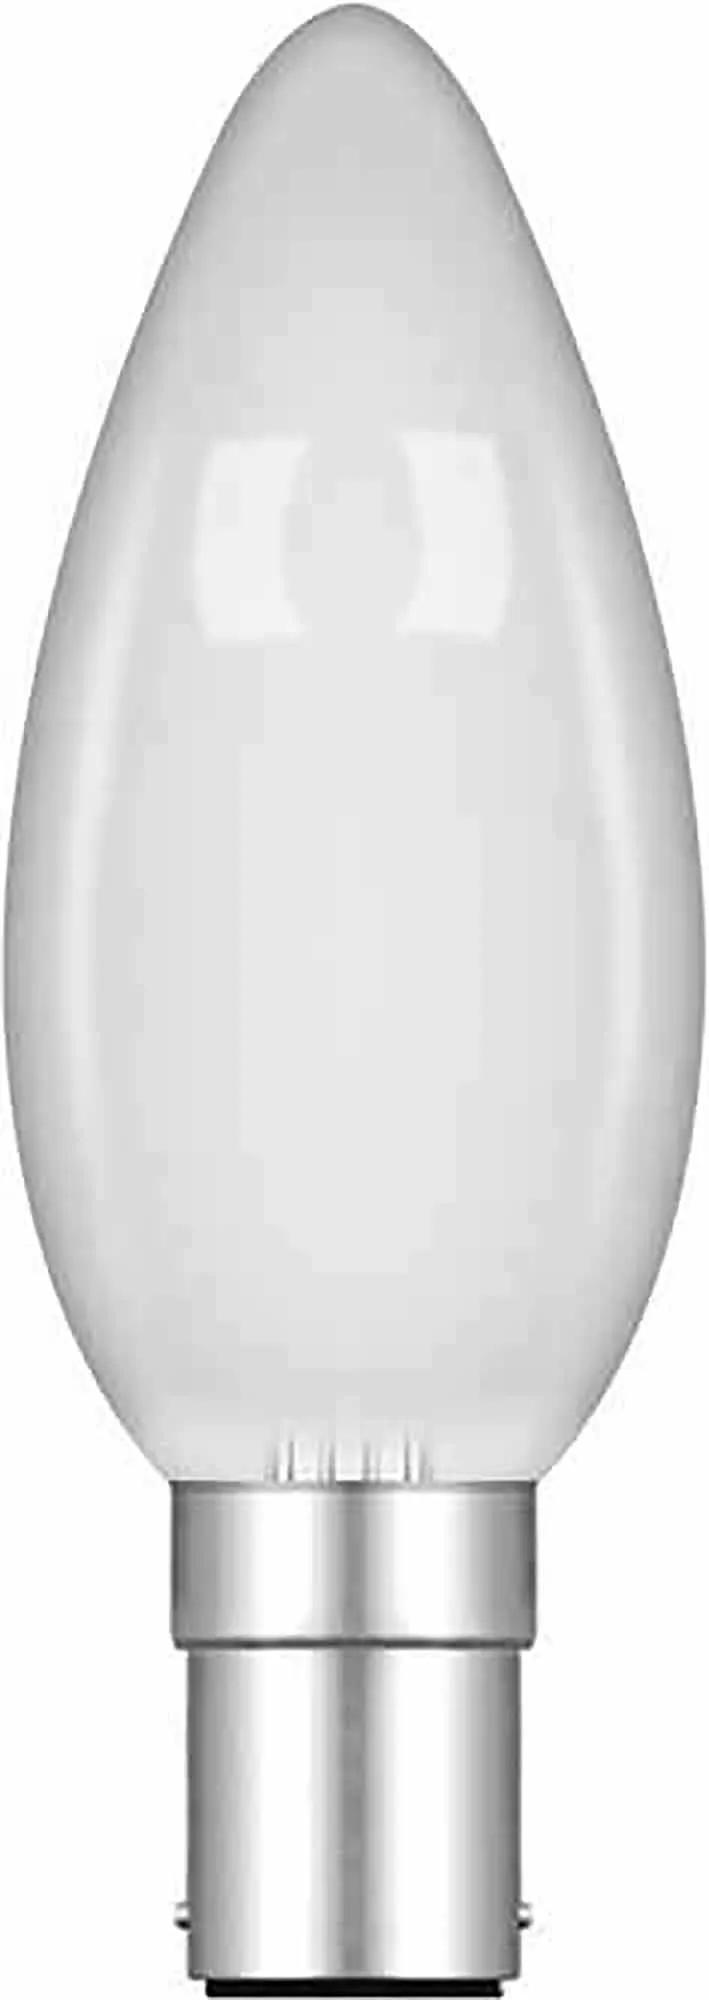 Candle B15 35mm Incandescent Luxram Candle